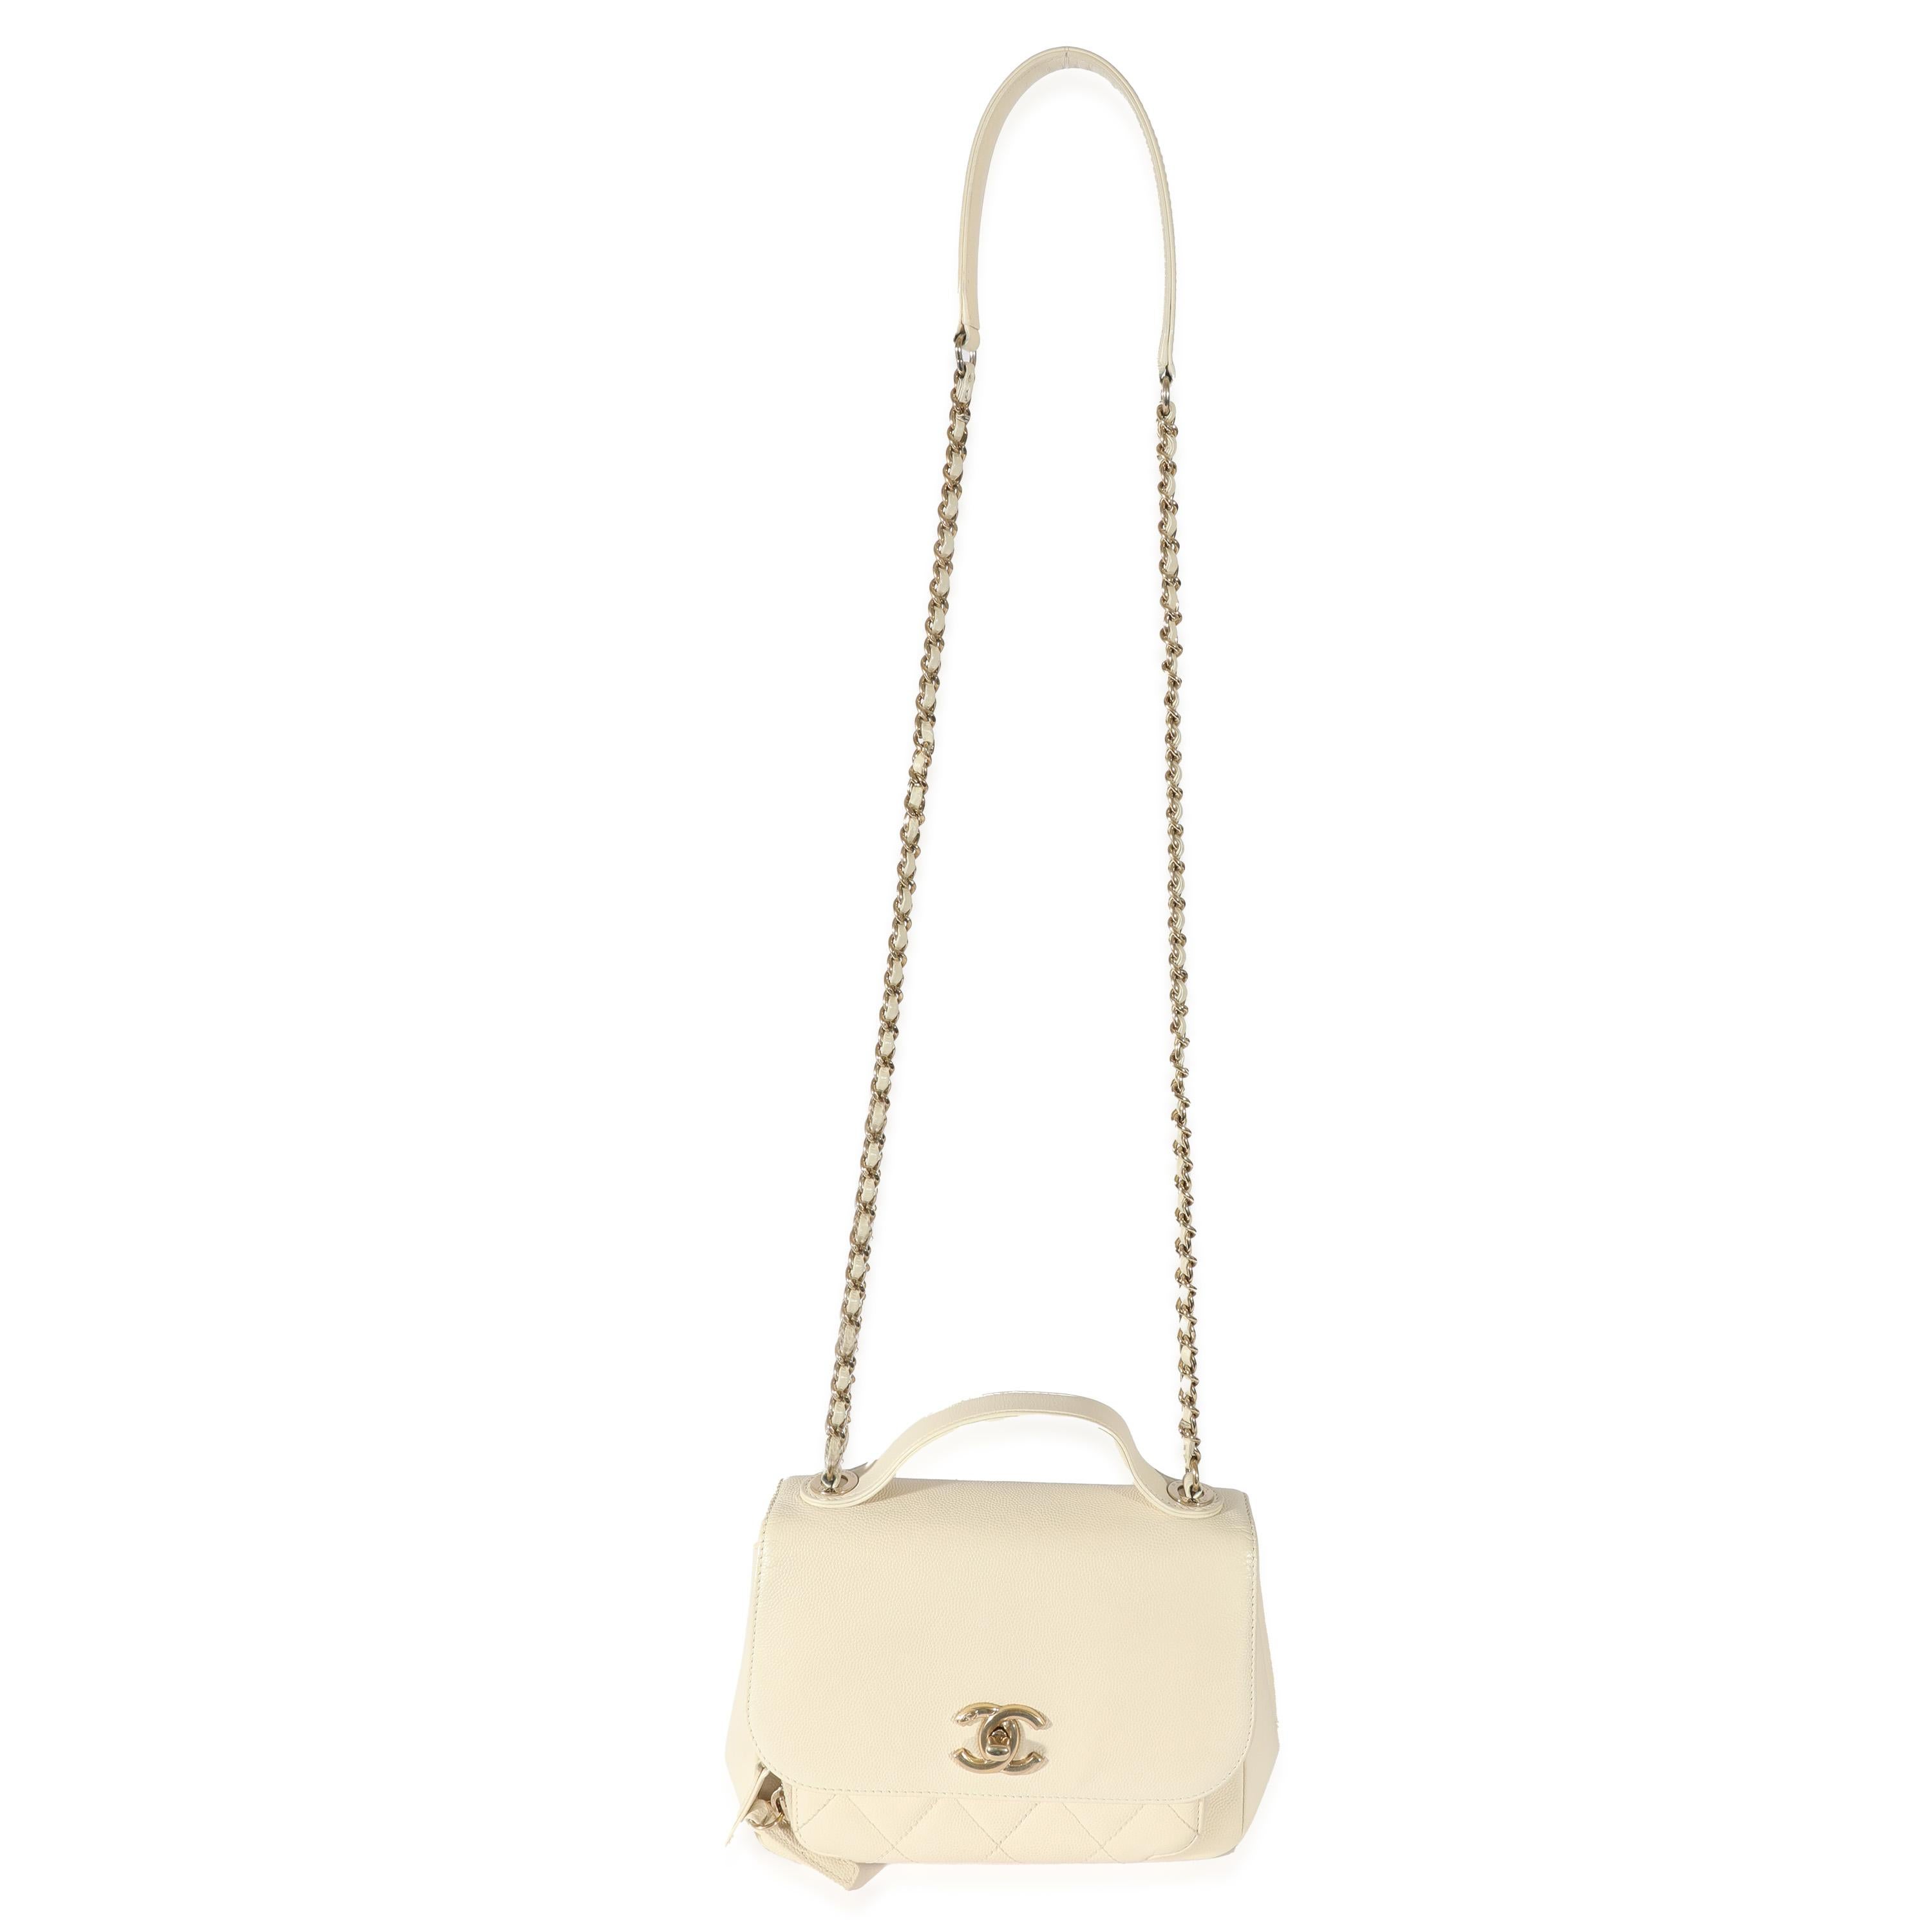 Listing Title: Chanel Cream Caviar Mini Business Affinity Flap
SKU: 128009
Condition: Pre-owned 
Handbag Condition: Good
Condition Comments: Good Condition. Exterior scuffing, wrinkling, and discoloration throughout. Heavy scratching at hardware.